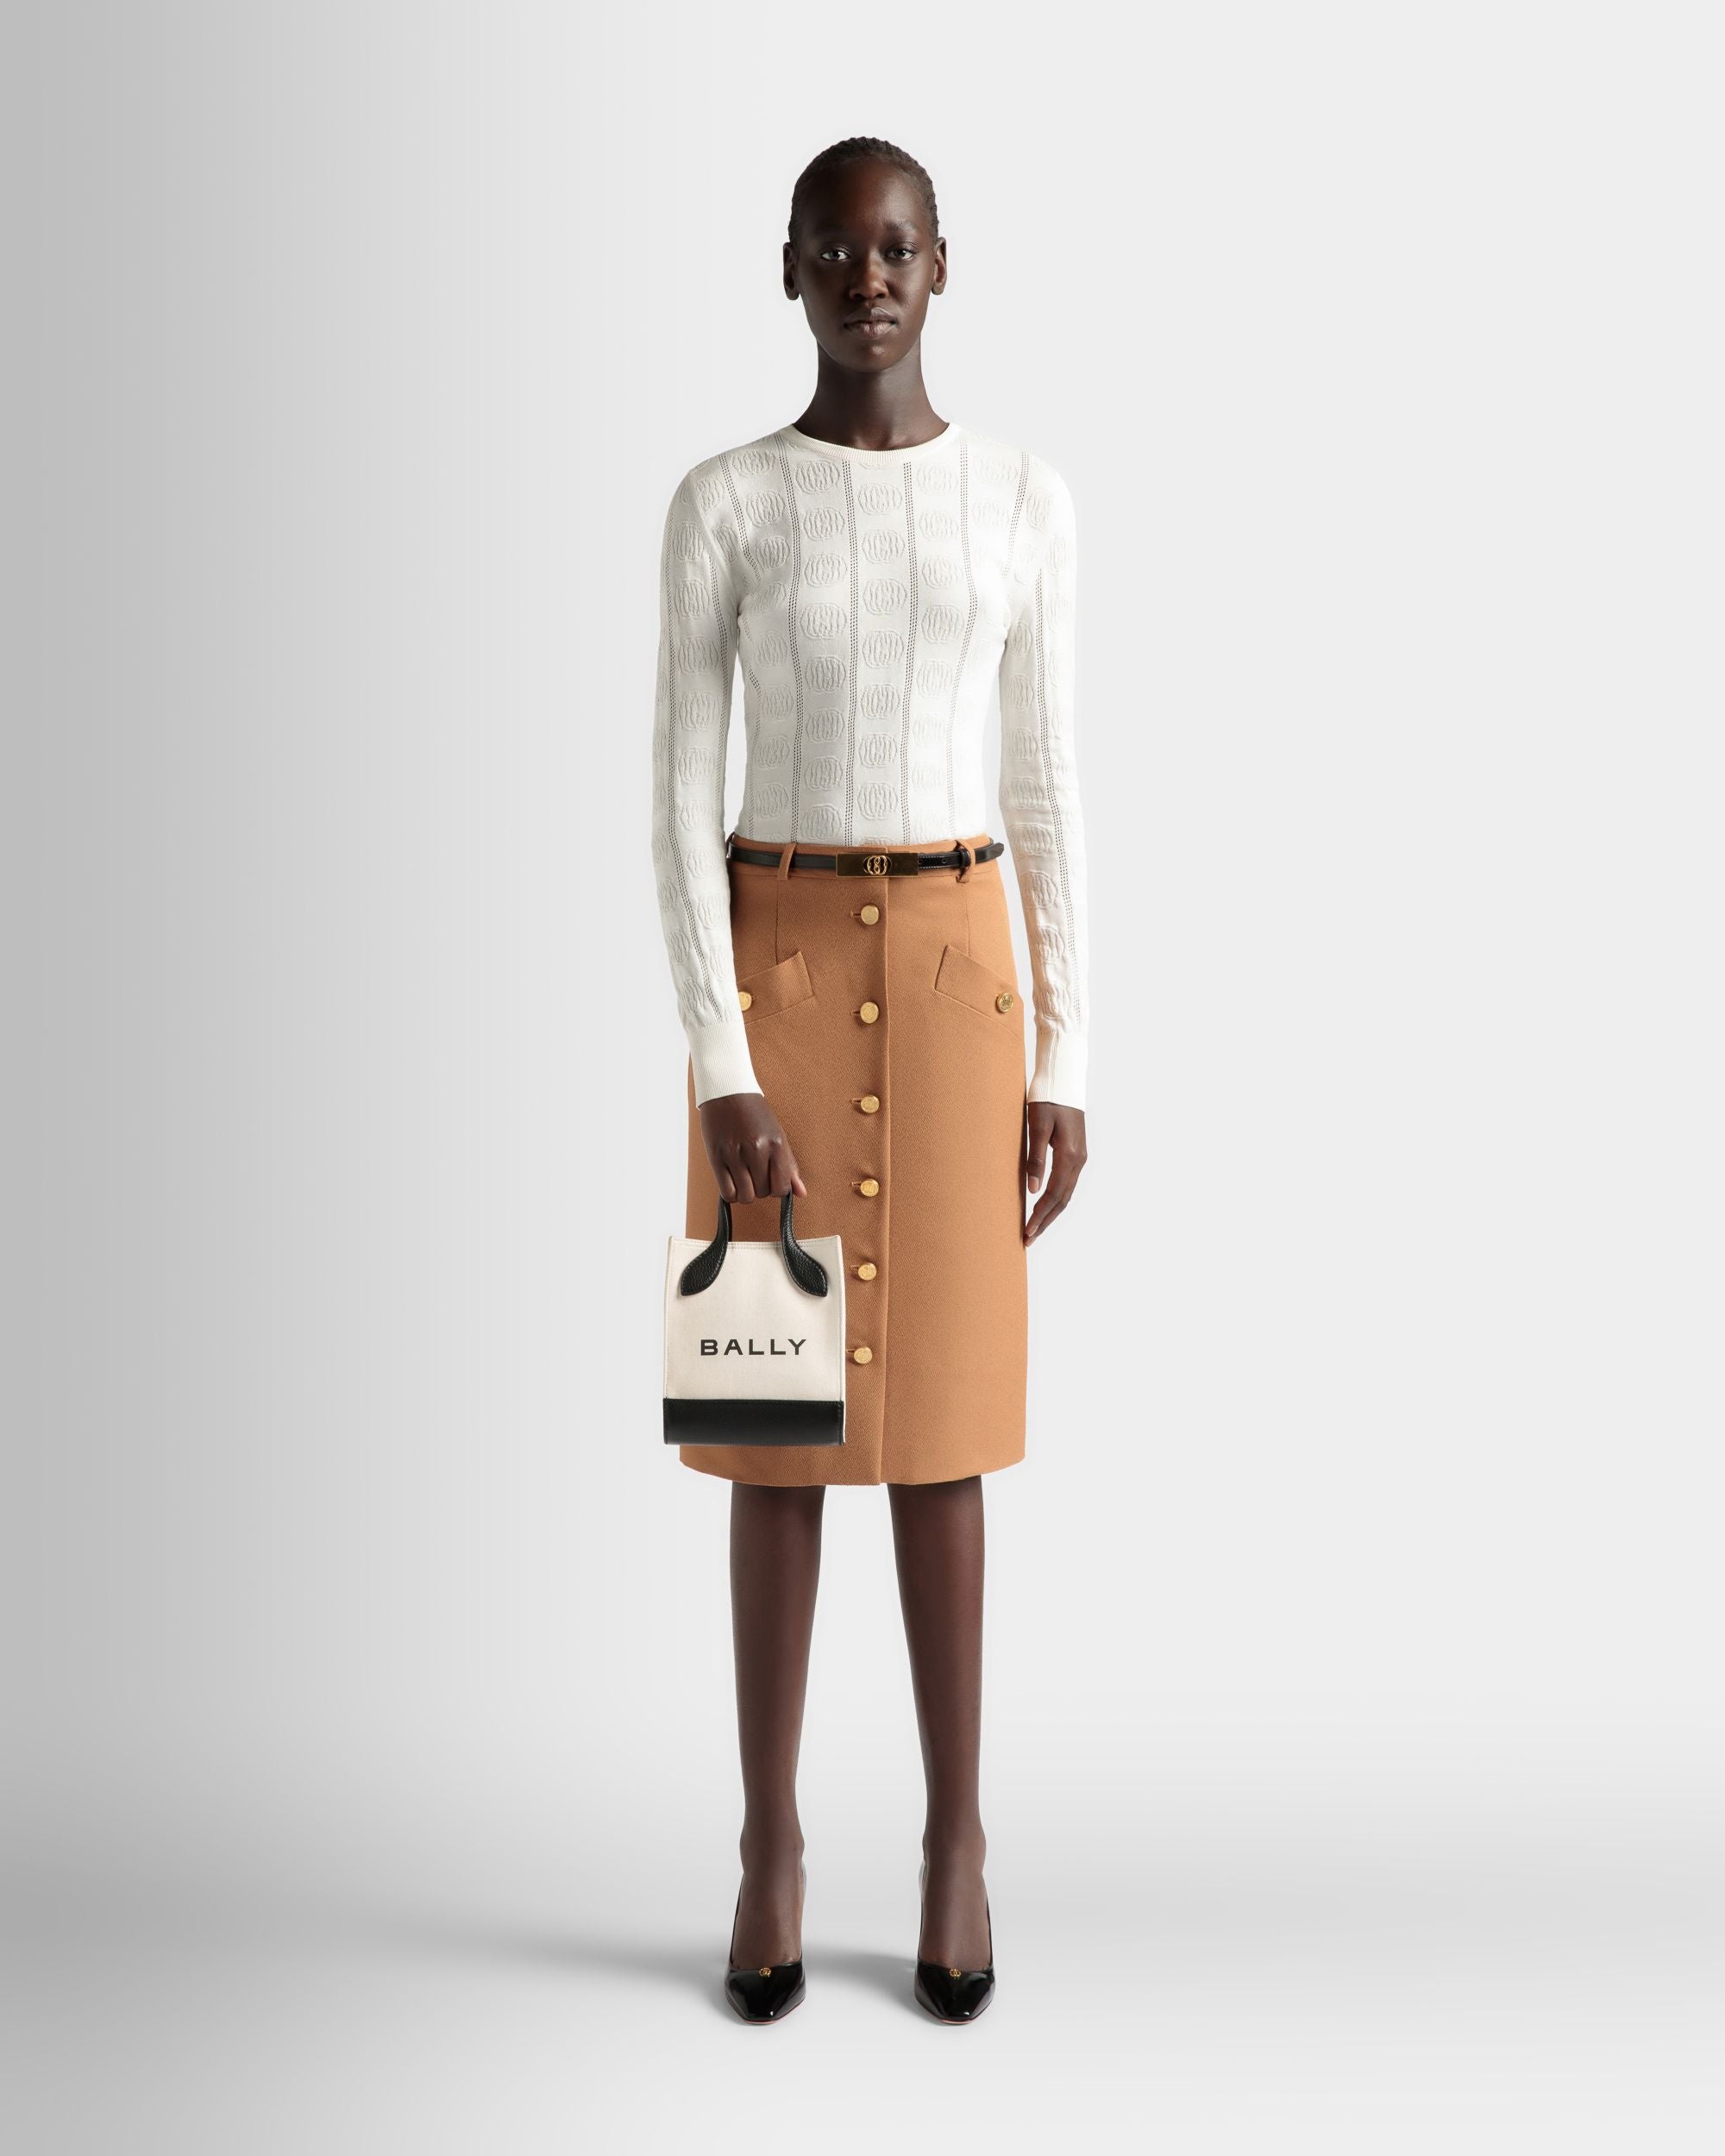 Bar | Women's Mini Tote Bag in Neutral And Black Canvas And Leather | Bally | On Model Front